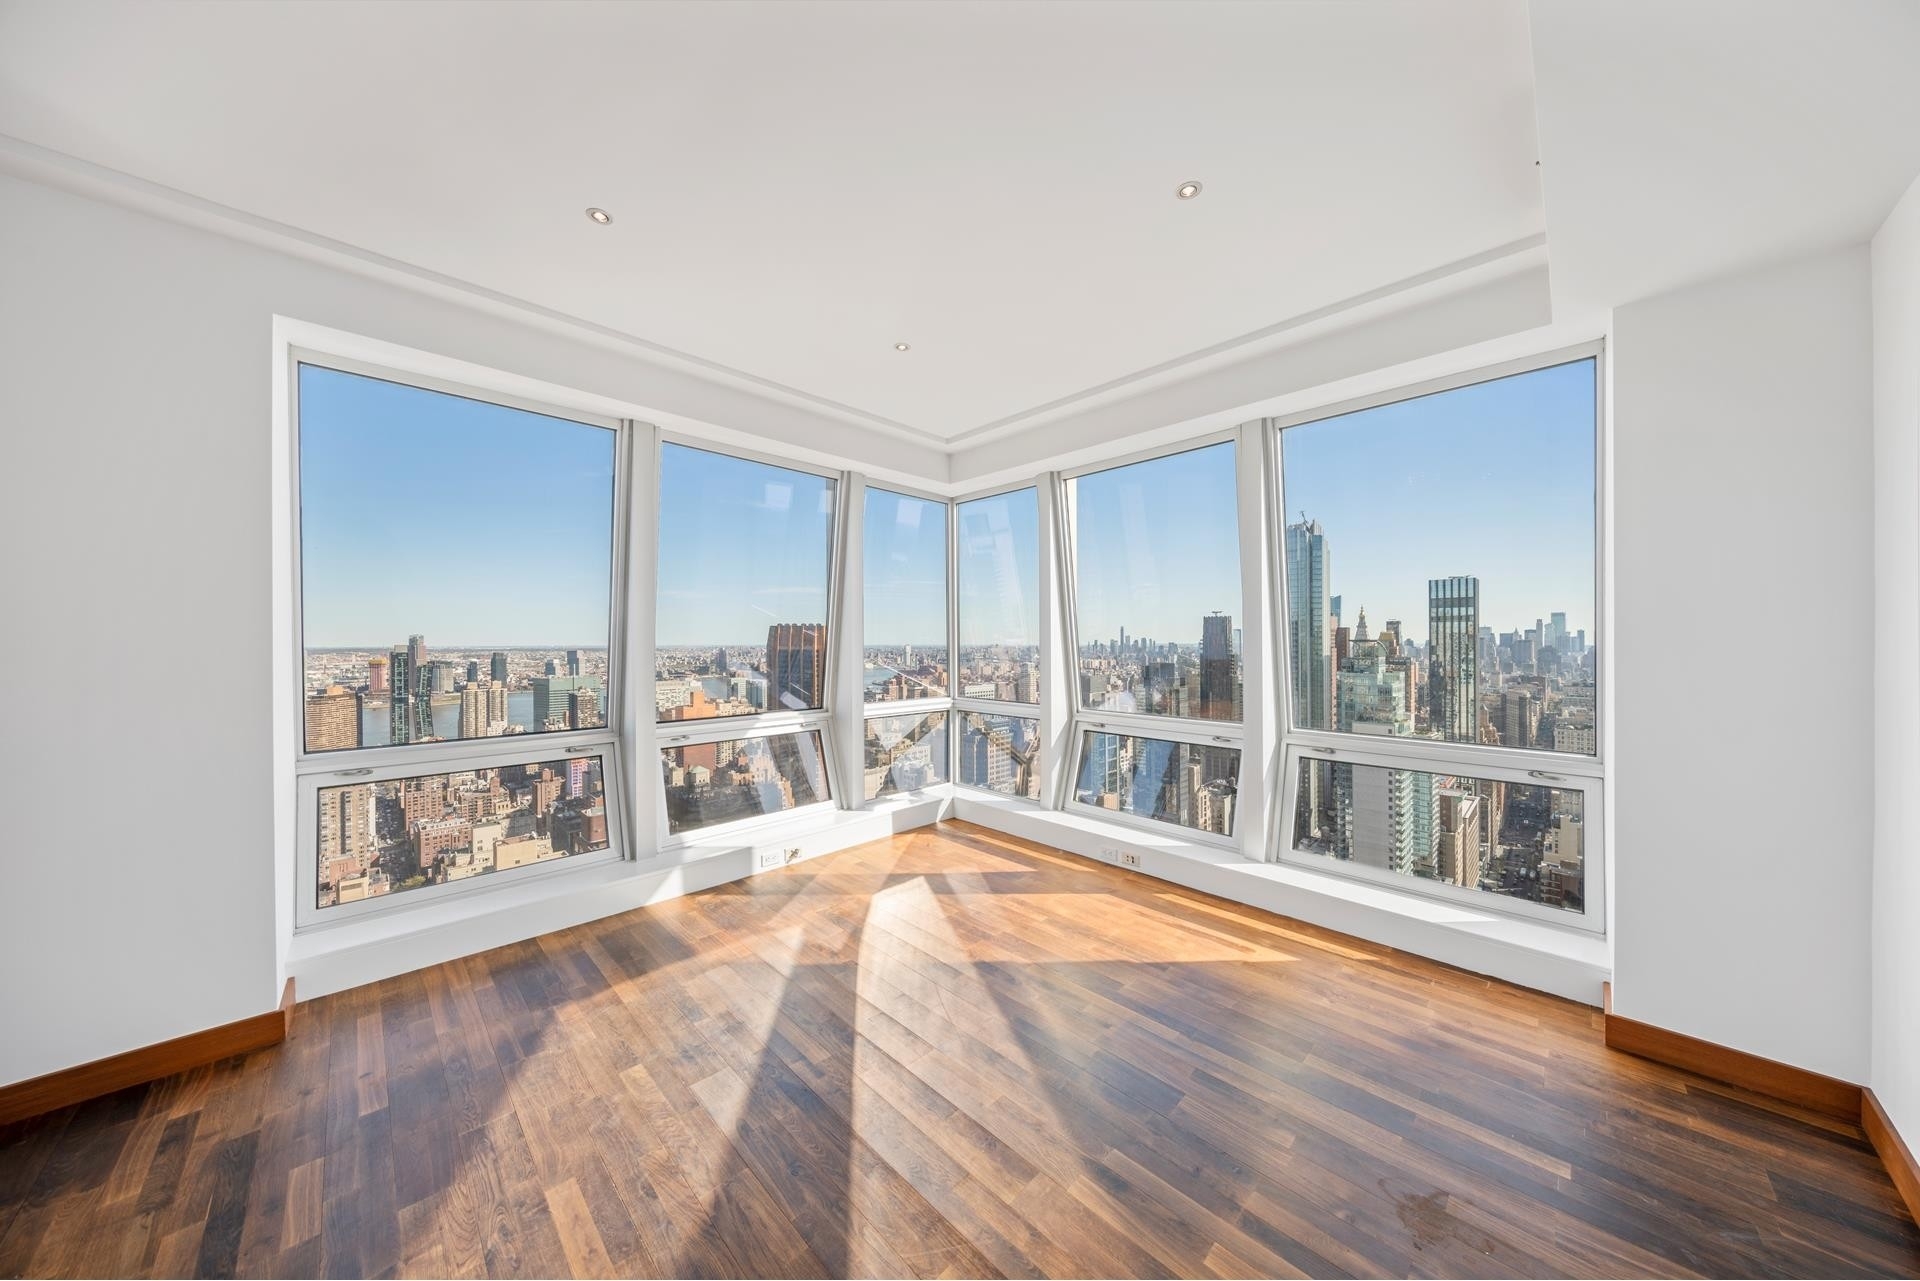 Property en Residences-Langham, 400 FIFTH AVE , 51A Midtown West, New York, NY 10018